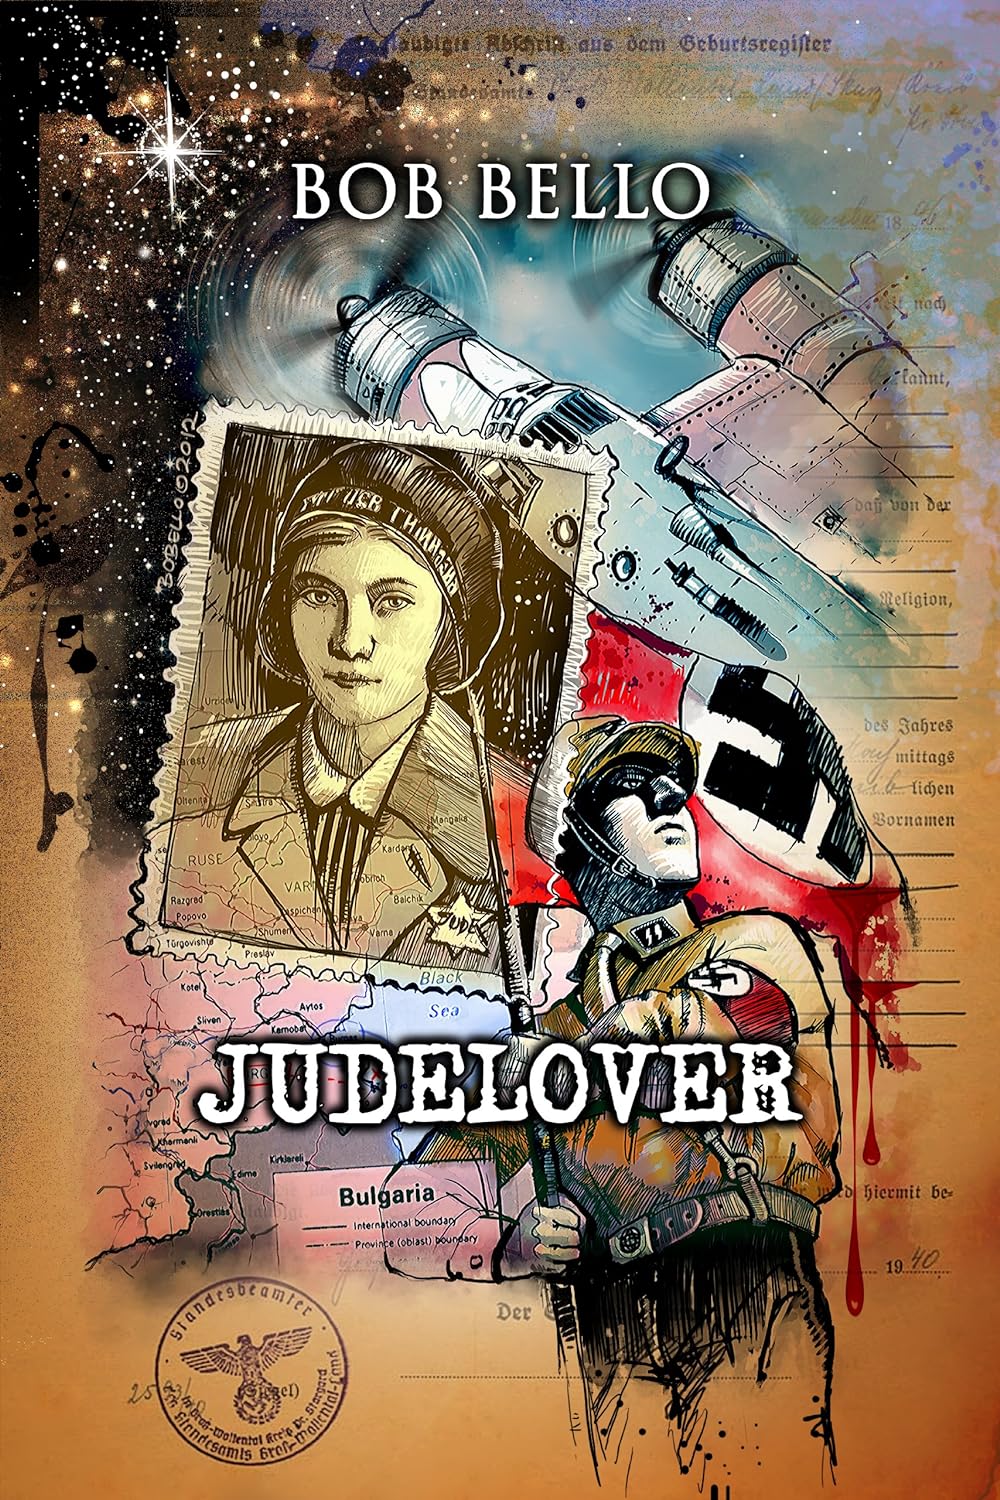 Judelover by Bob Bello: A Profound Journey of Redemption and Love